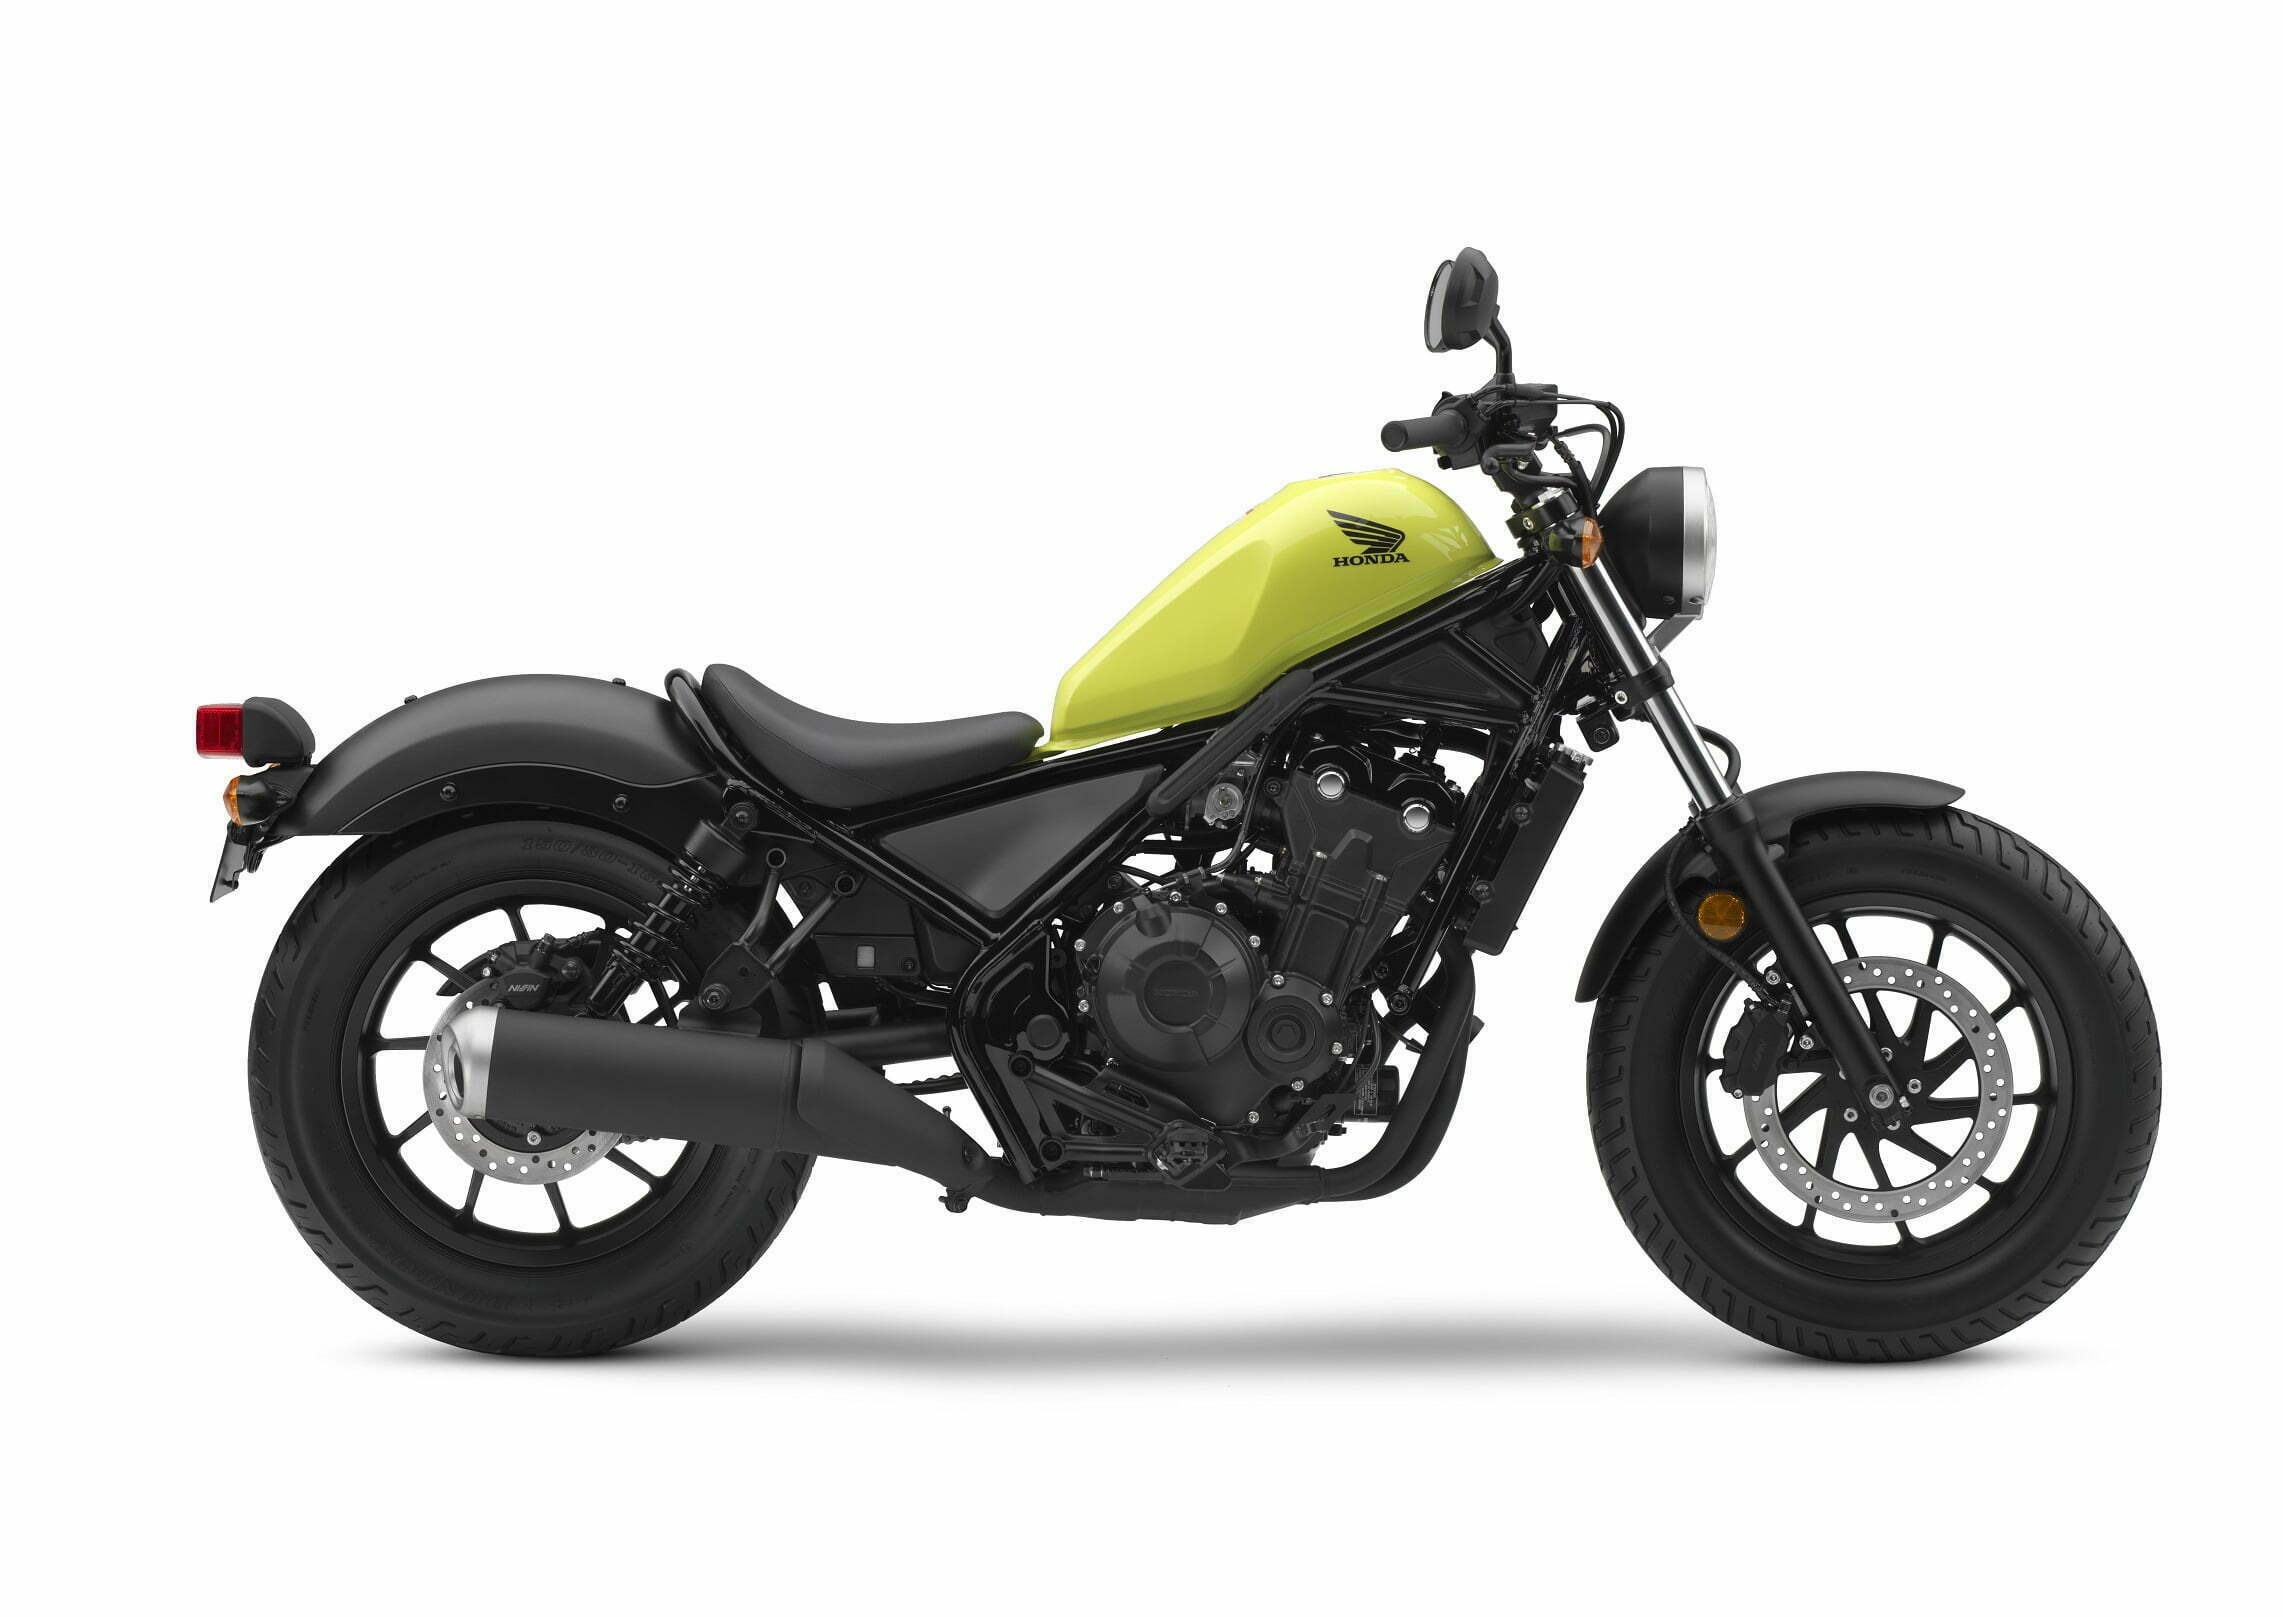 The Honda Rebel rolled into 2017 with the same purpose as its 1980s-era predecessor, but with an entirely new design and styling. Pictured is the 2017 Rebel 500.